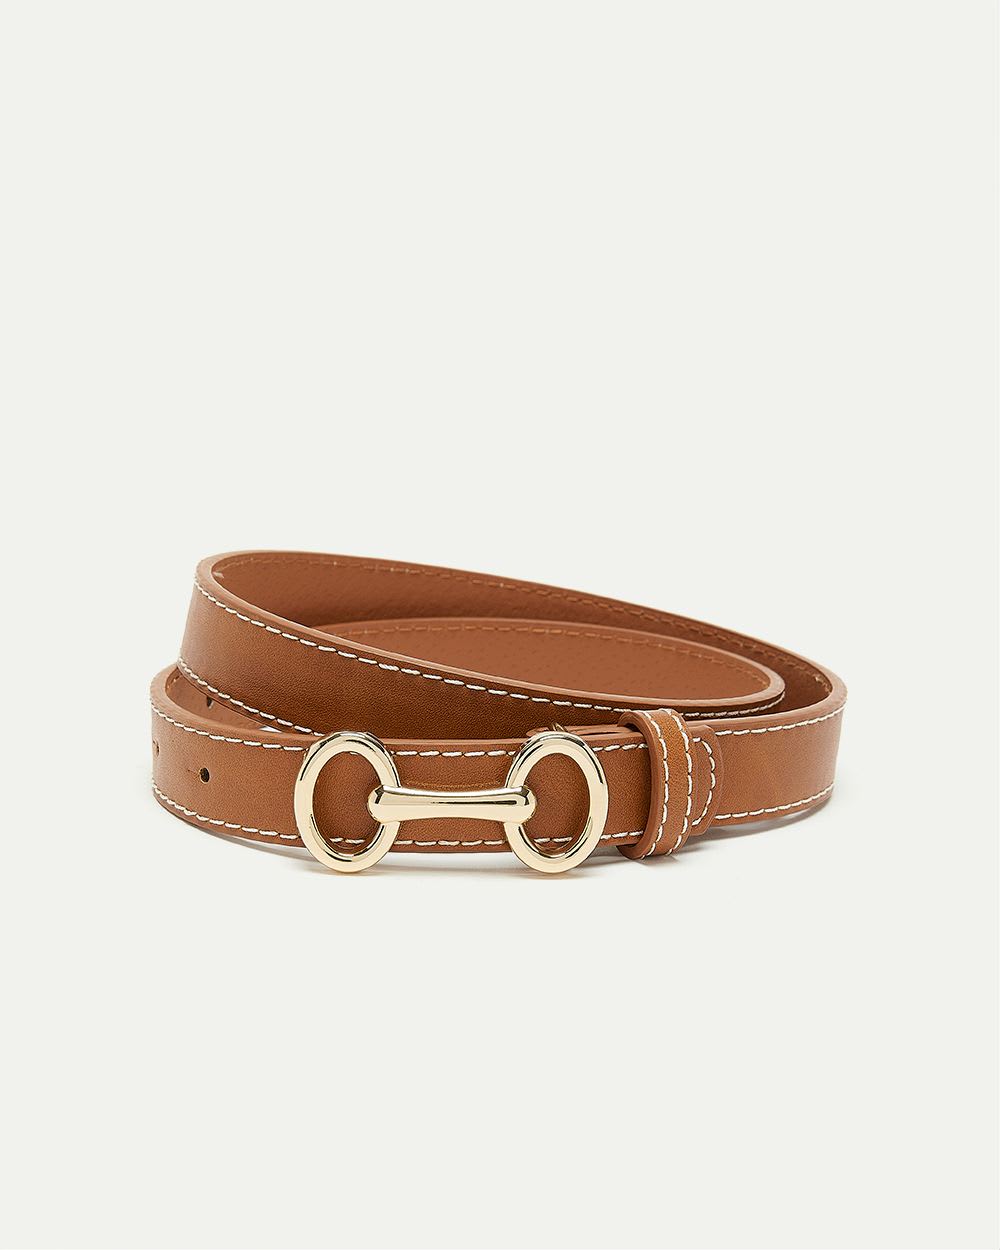 Skinny Belt with Contrast Stitches